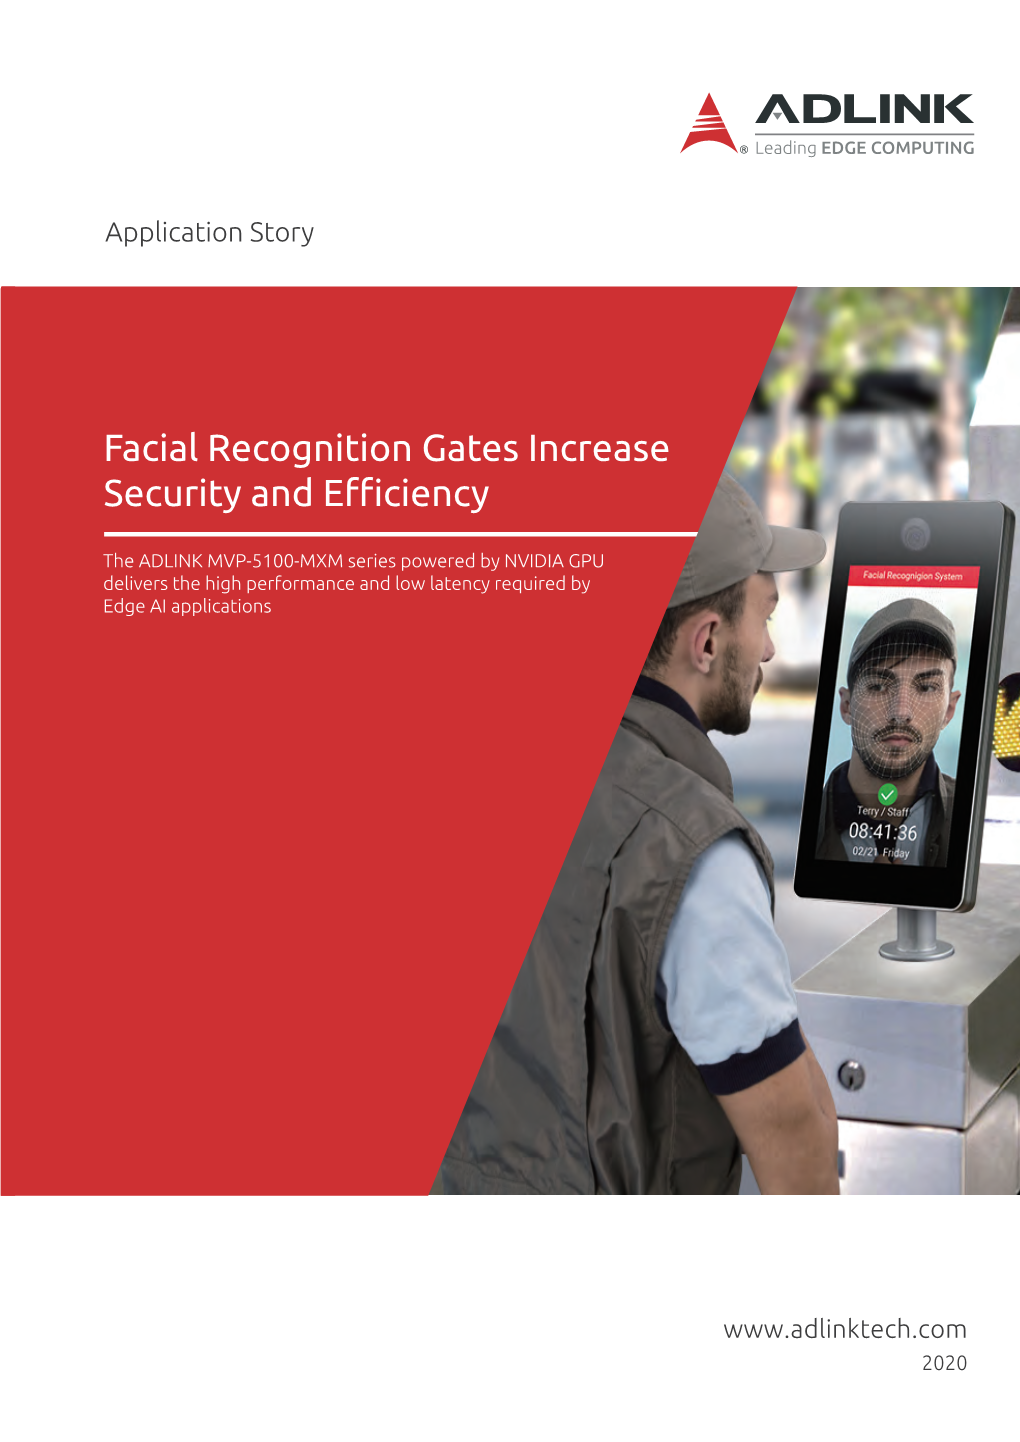 Facial Recognition Gates Increase Security and Efficiency